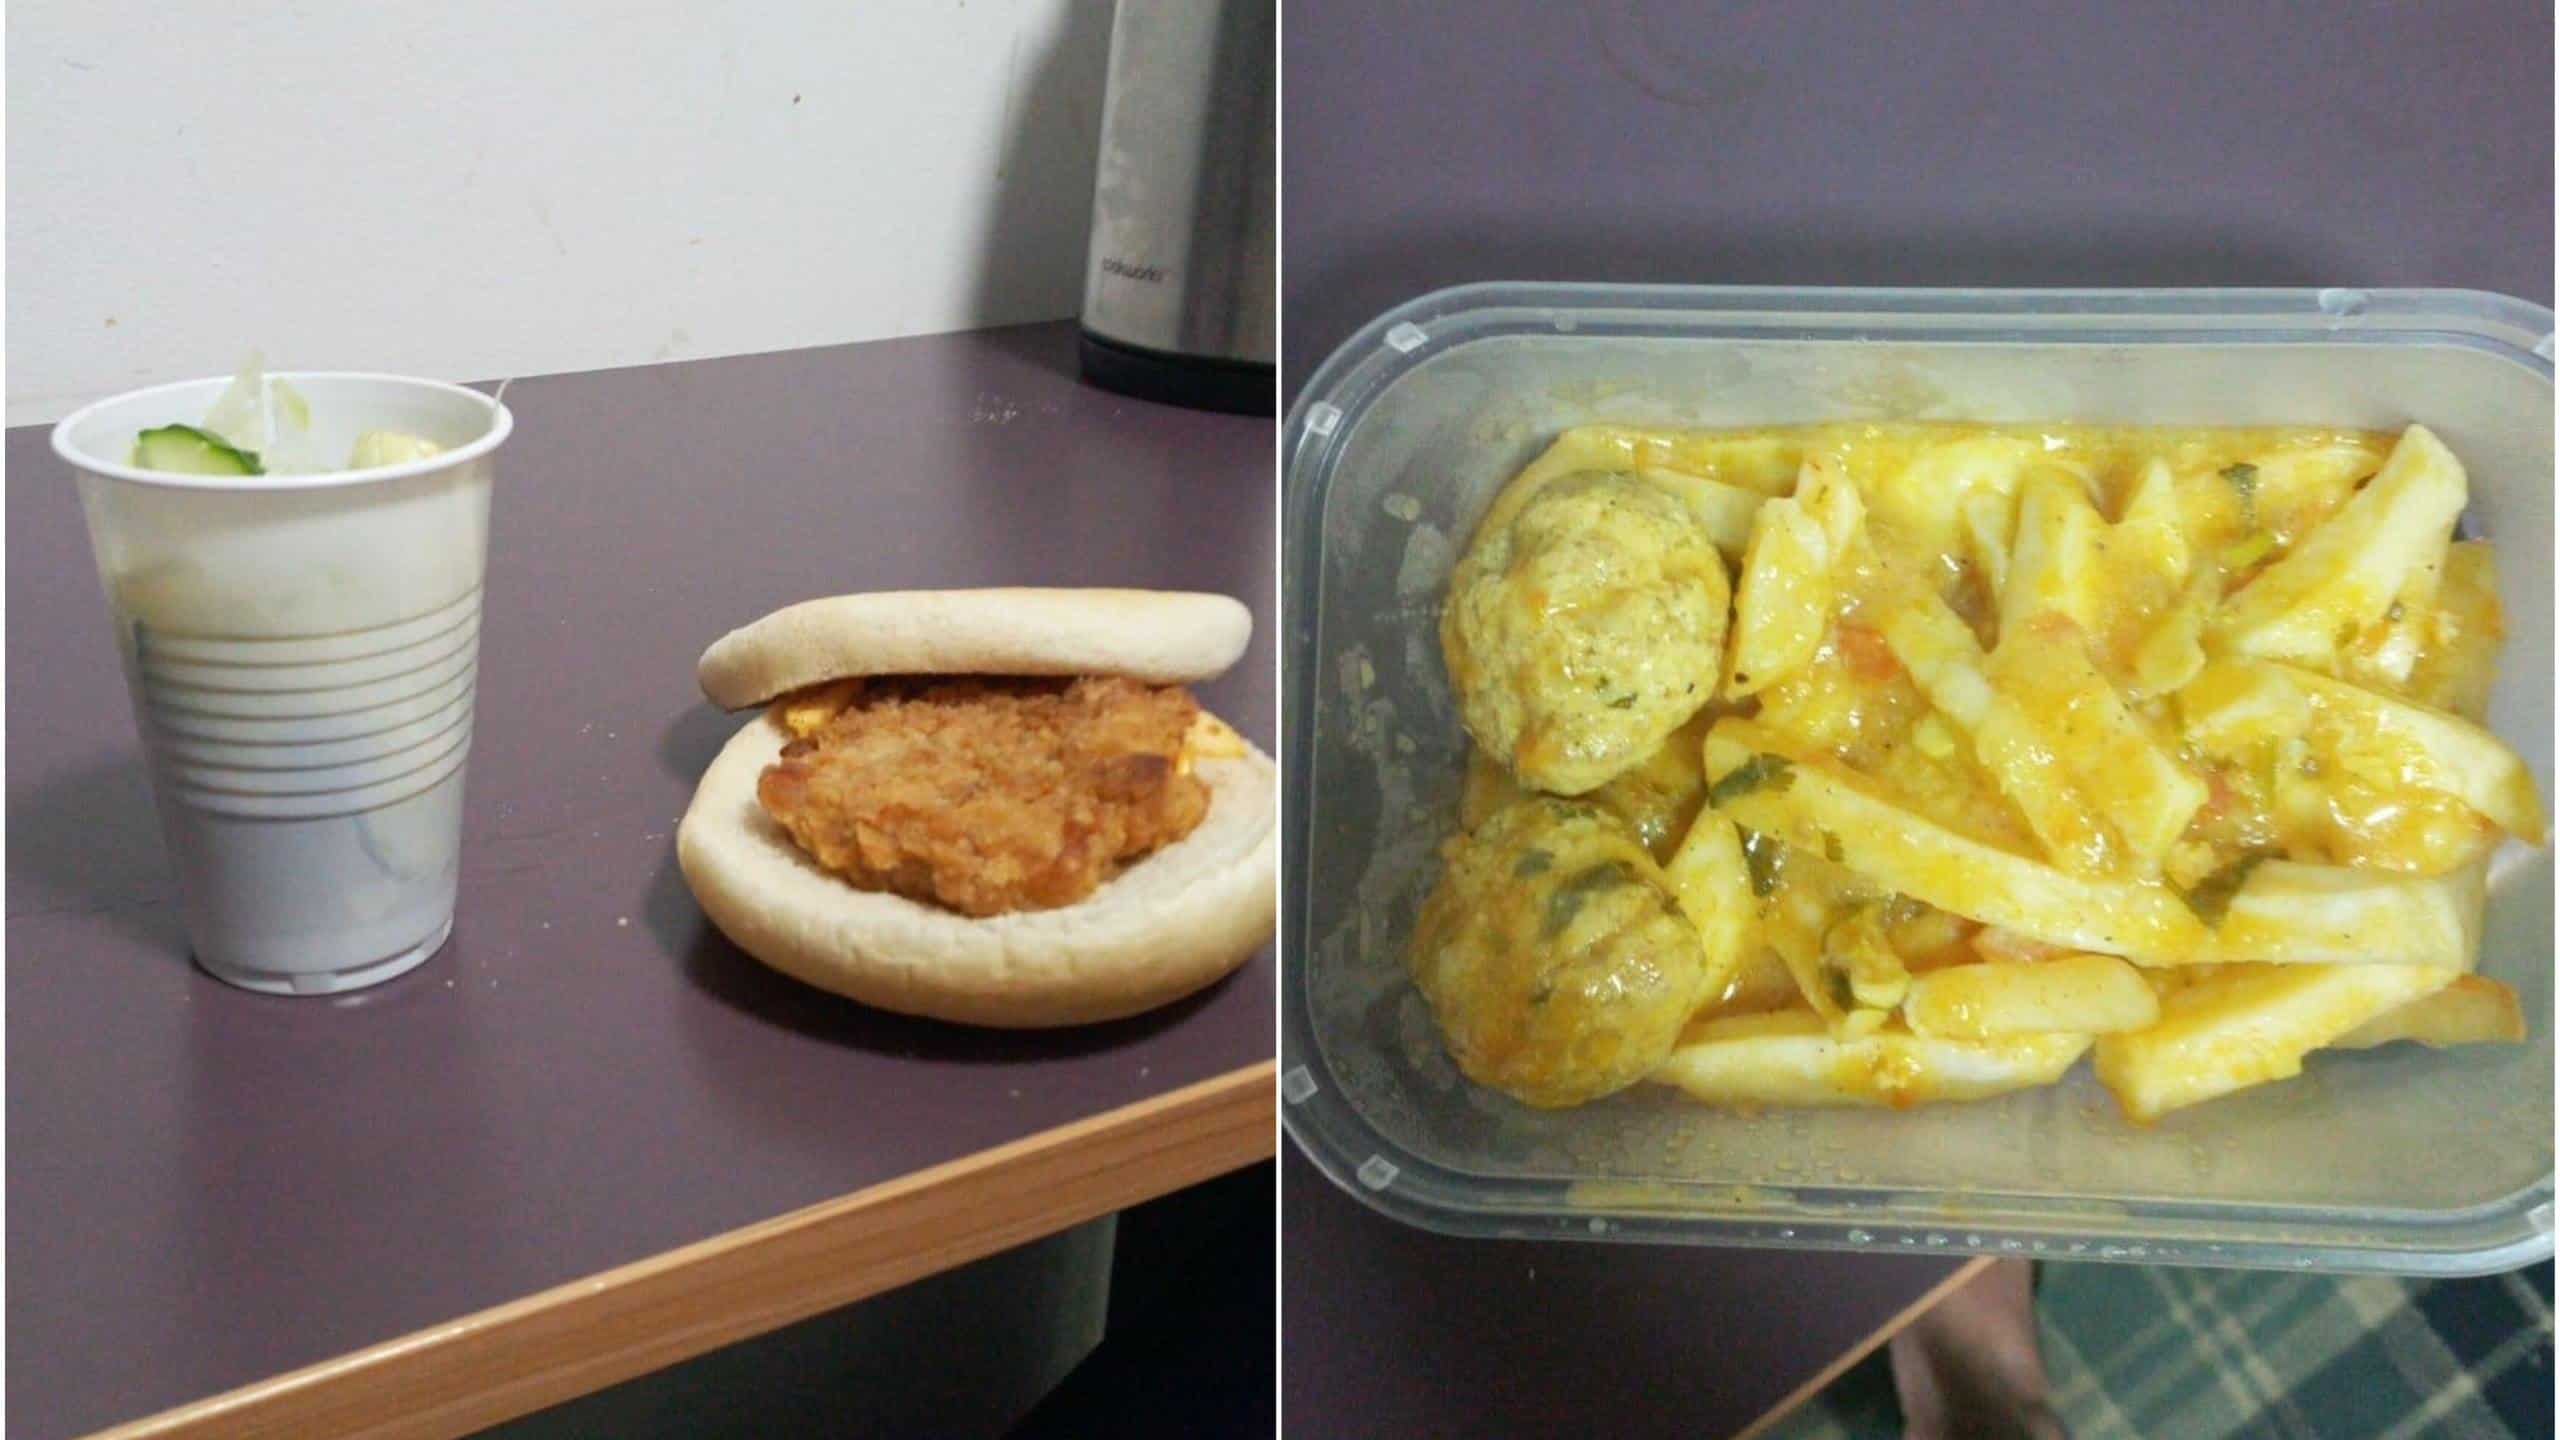 Asylum seekers in Glasgow ‘malnourished with food not fit for human consumption’